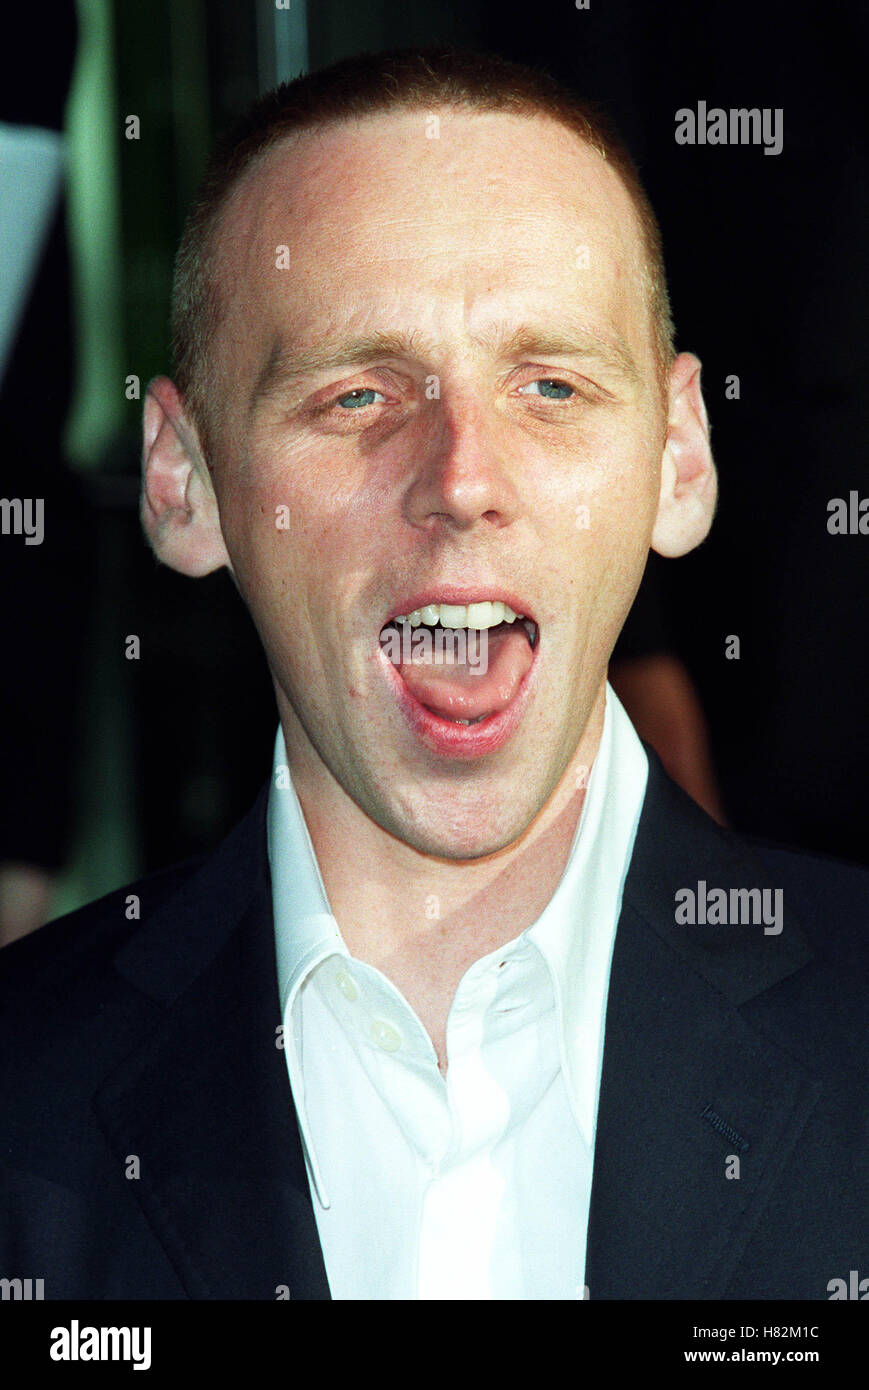 EWEN BREMNER 'PEARL HARBOUR' PREM LONDON LEICESTER SQ LONDON ENGLAND 30 May 2001 Stock Photo